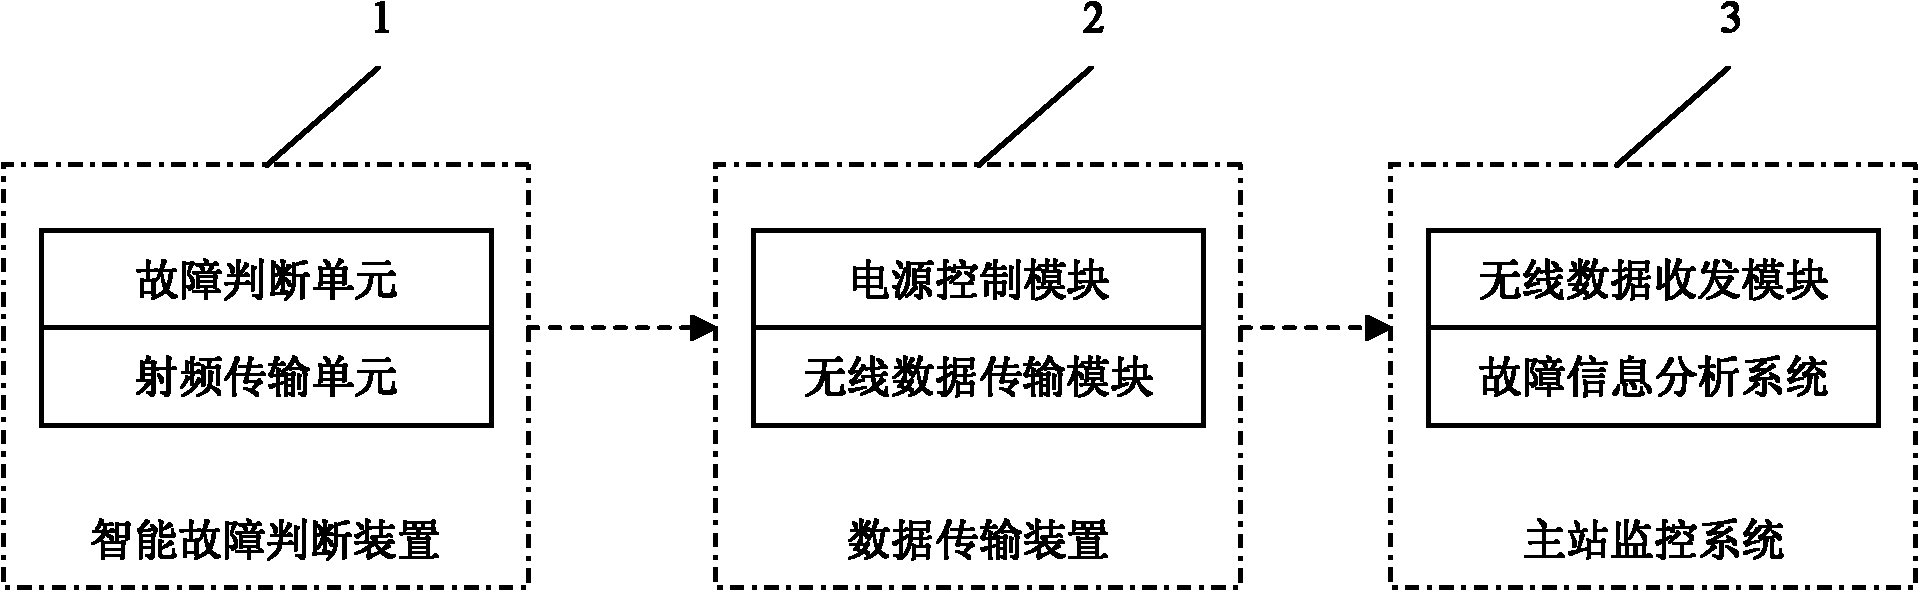 System for automatically judging and positioning faults of automatic blocking and continuous railway power lines in railway distribution network